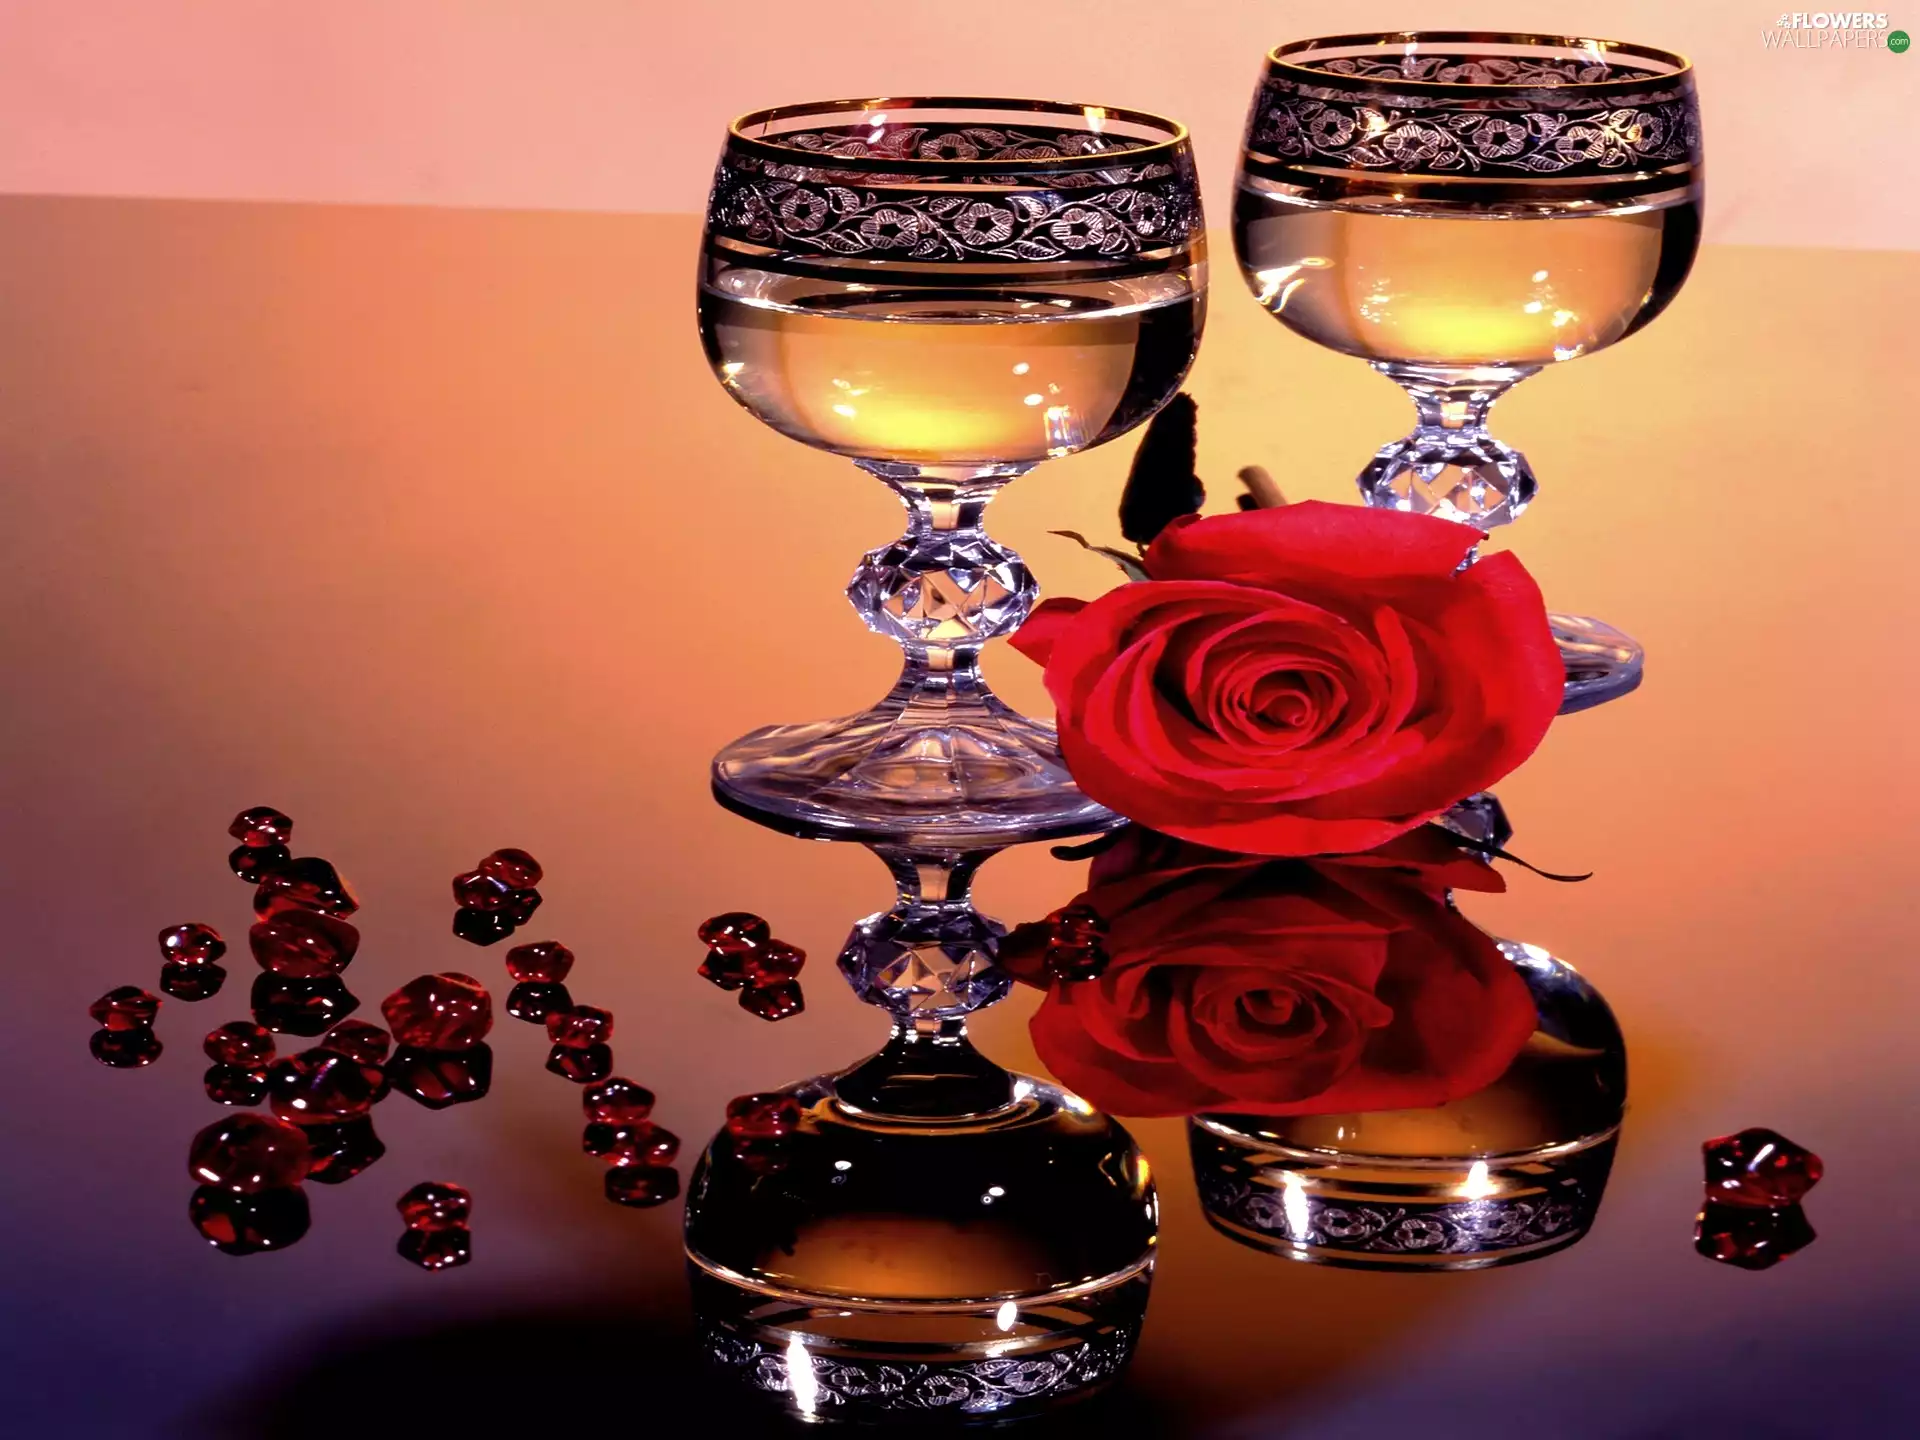 reflection, Mirror, rose, glasses, red hot